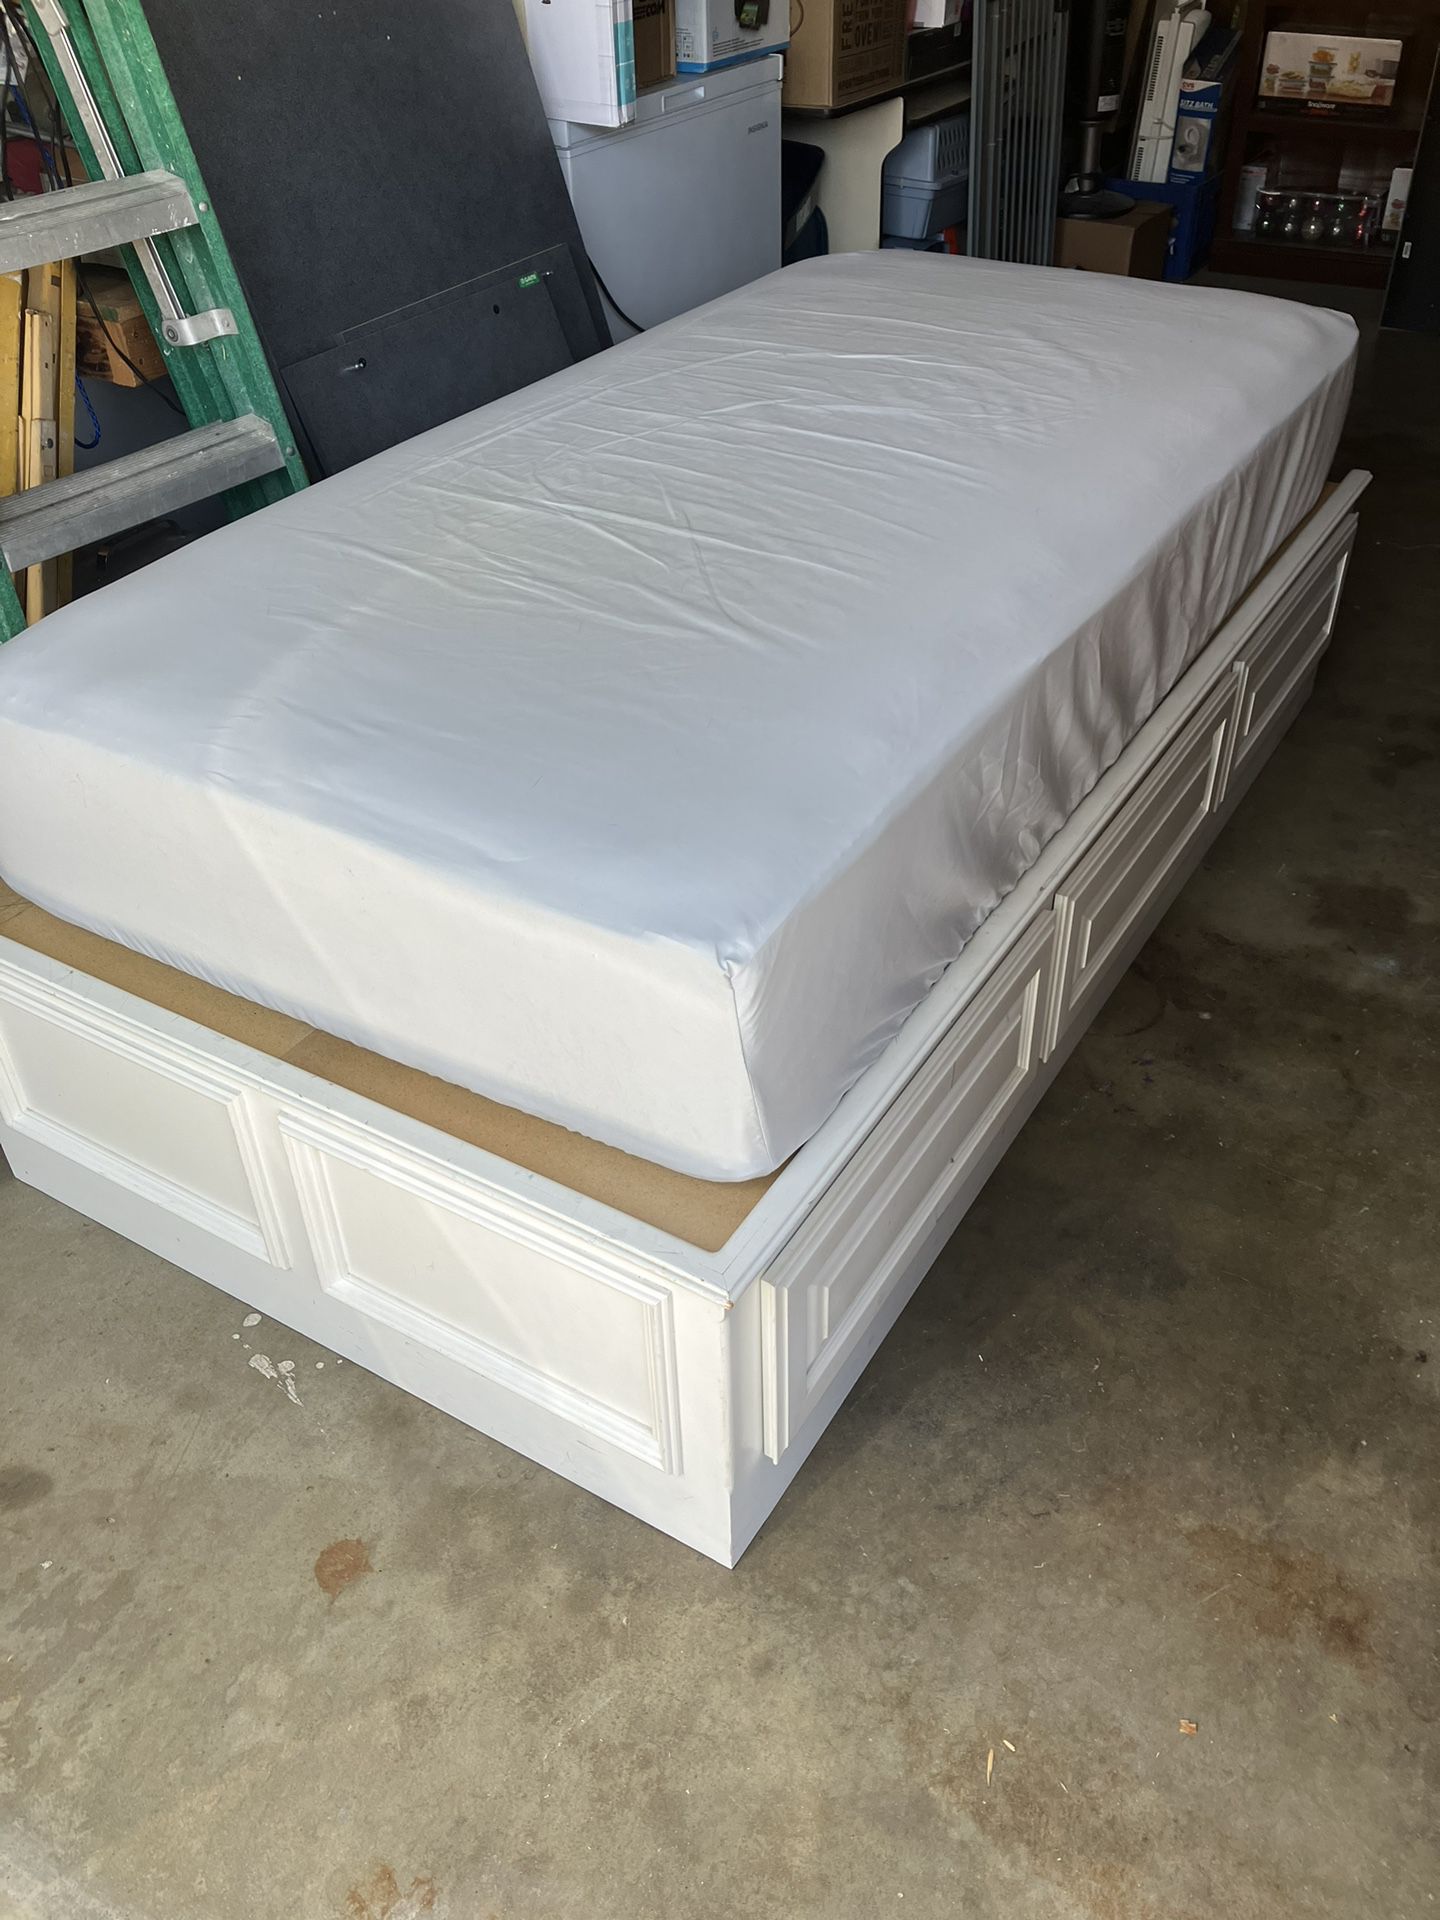 Twin Bed Platform With Cabinets Drawers